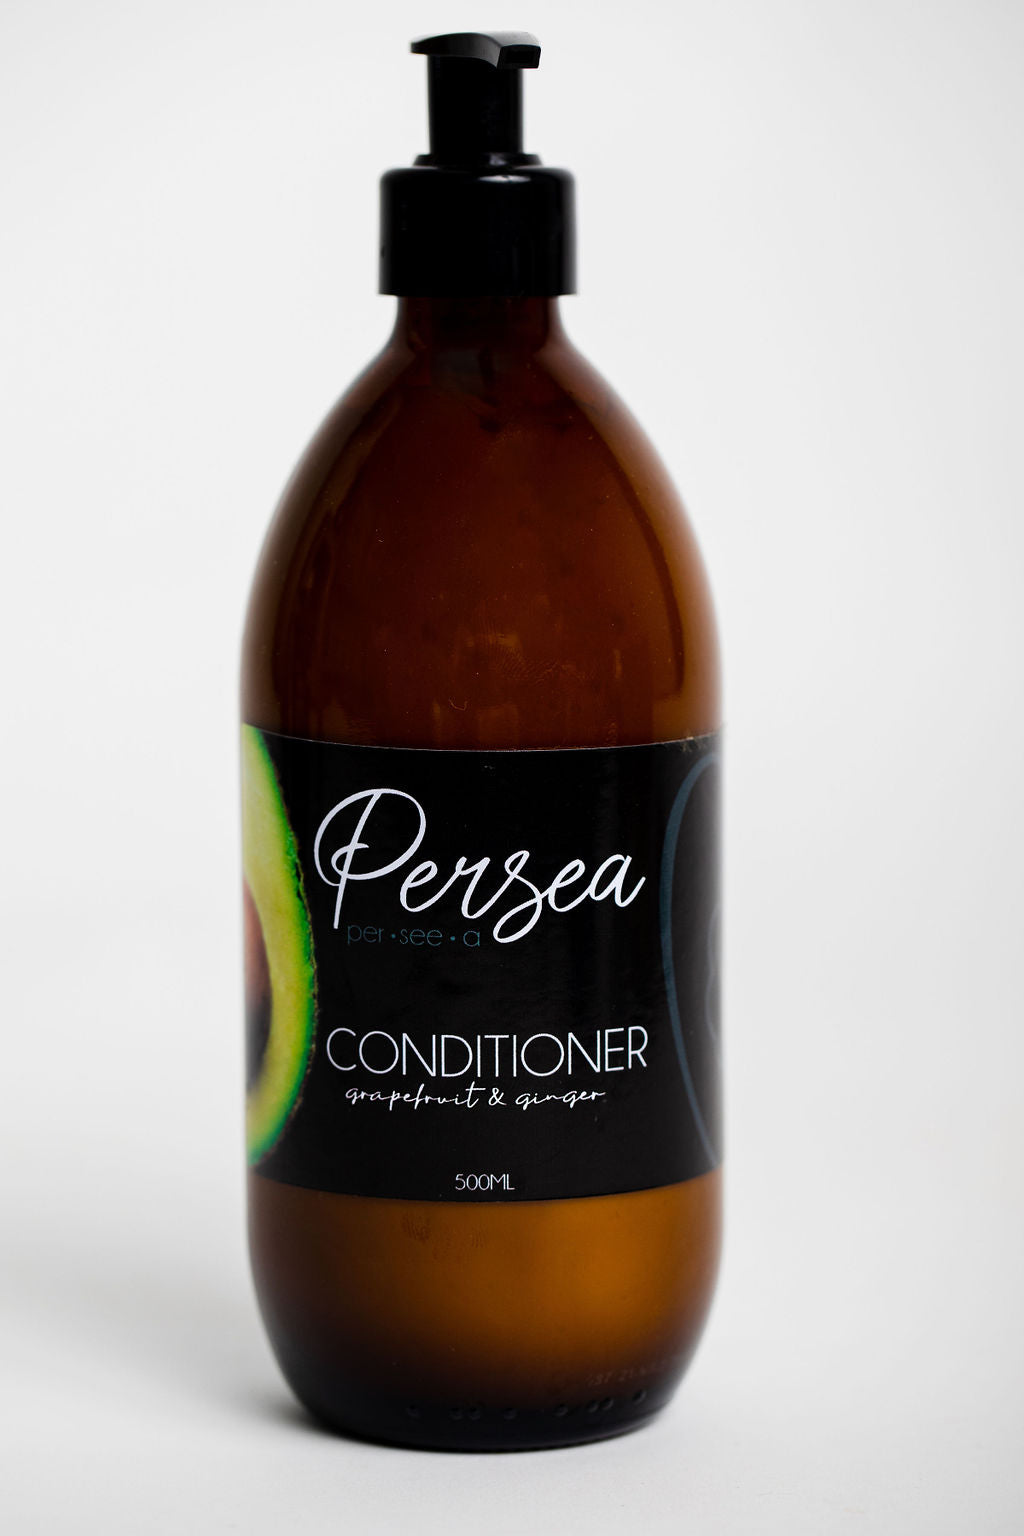 Persea Avo Conditioner. Grapefruit and Ginger Scent. All Natural. Phosphate free. Good hair day!